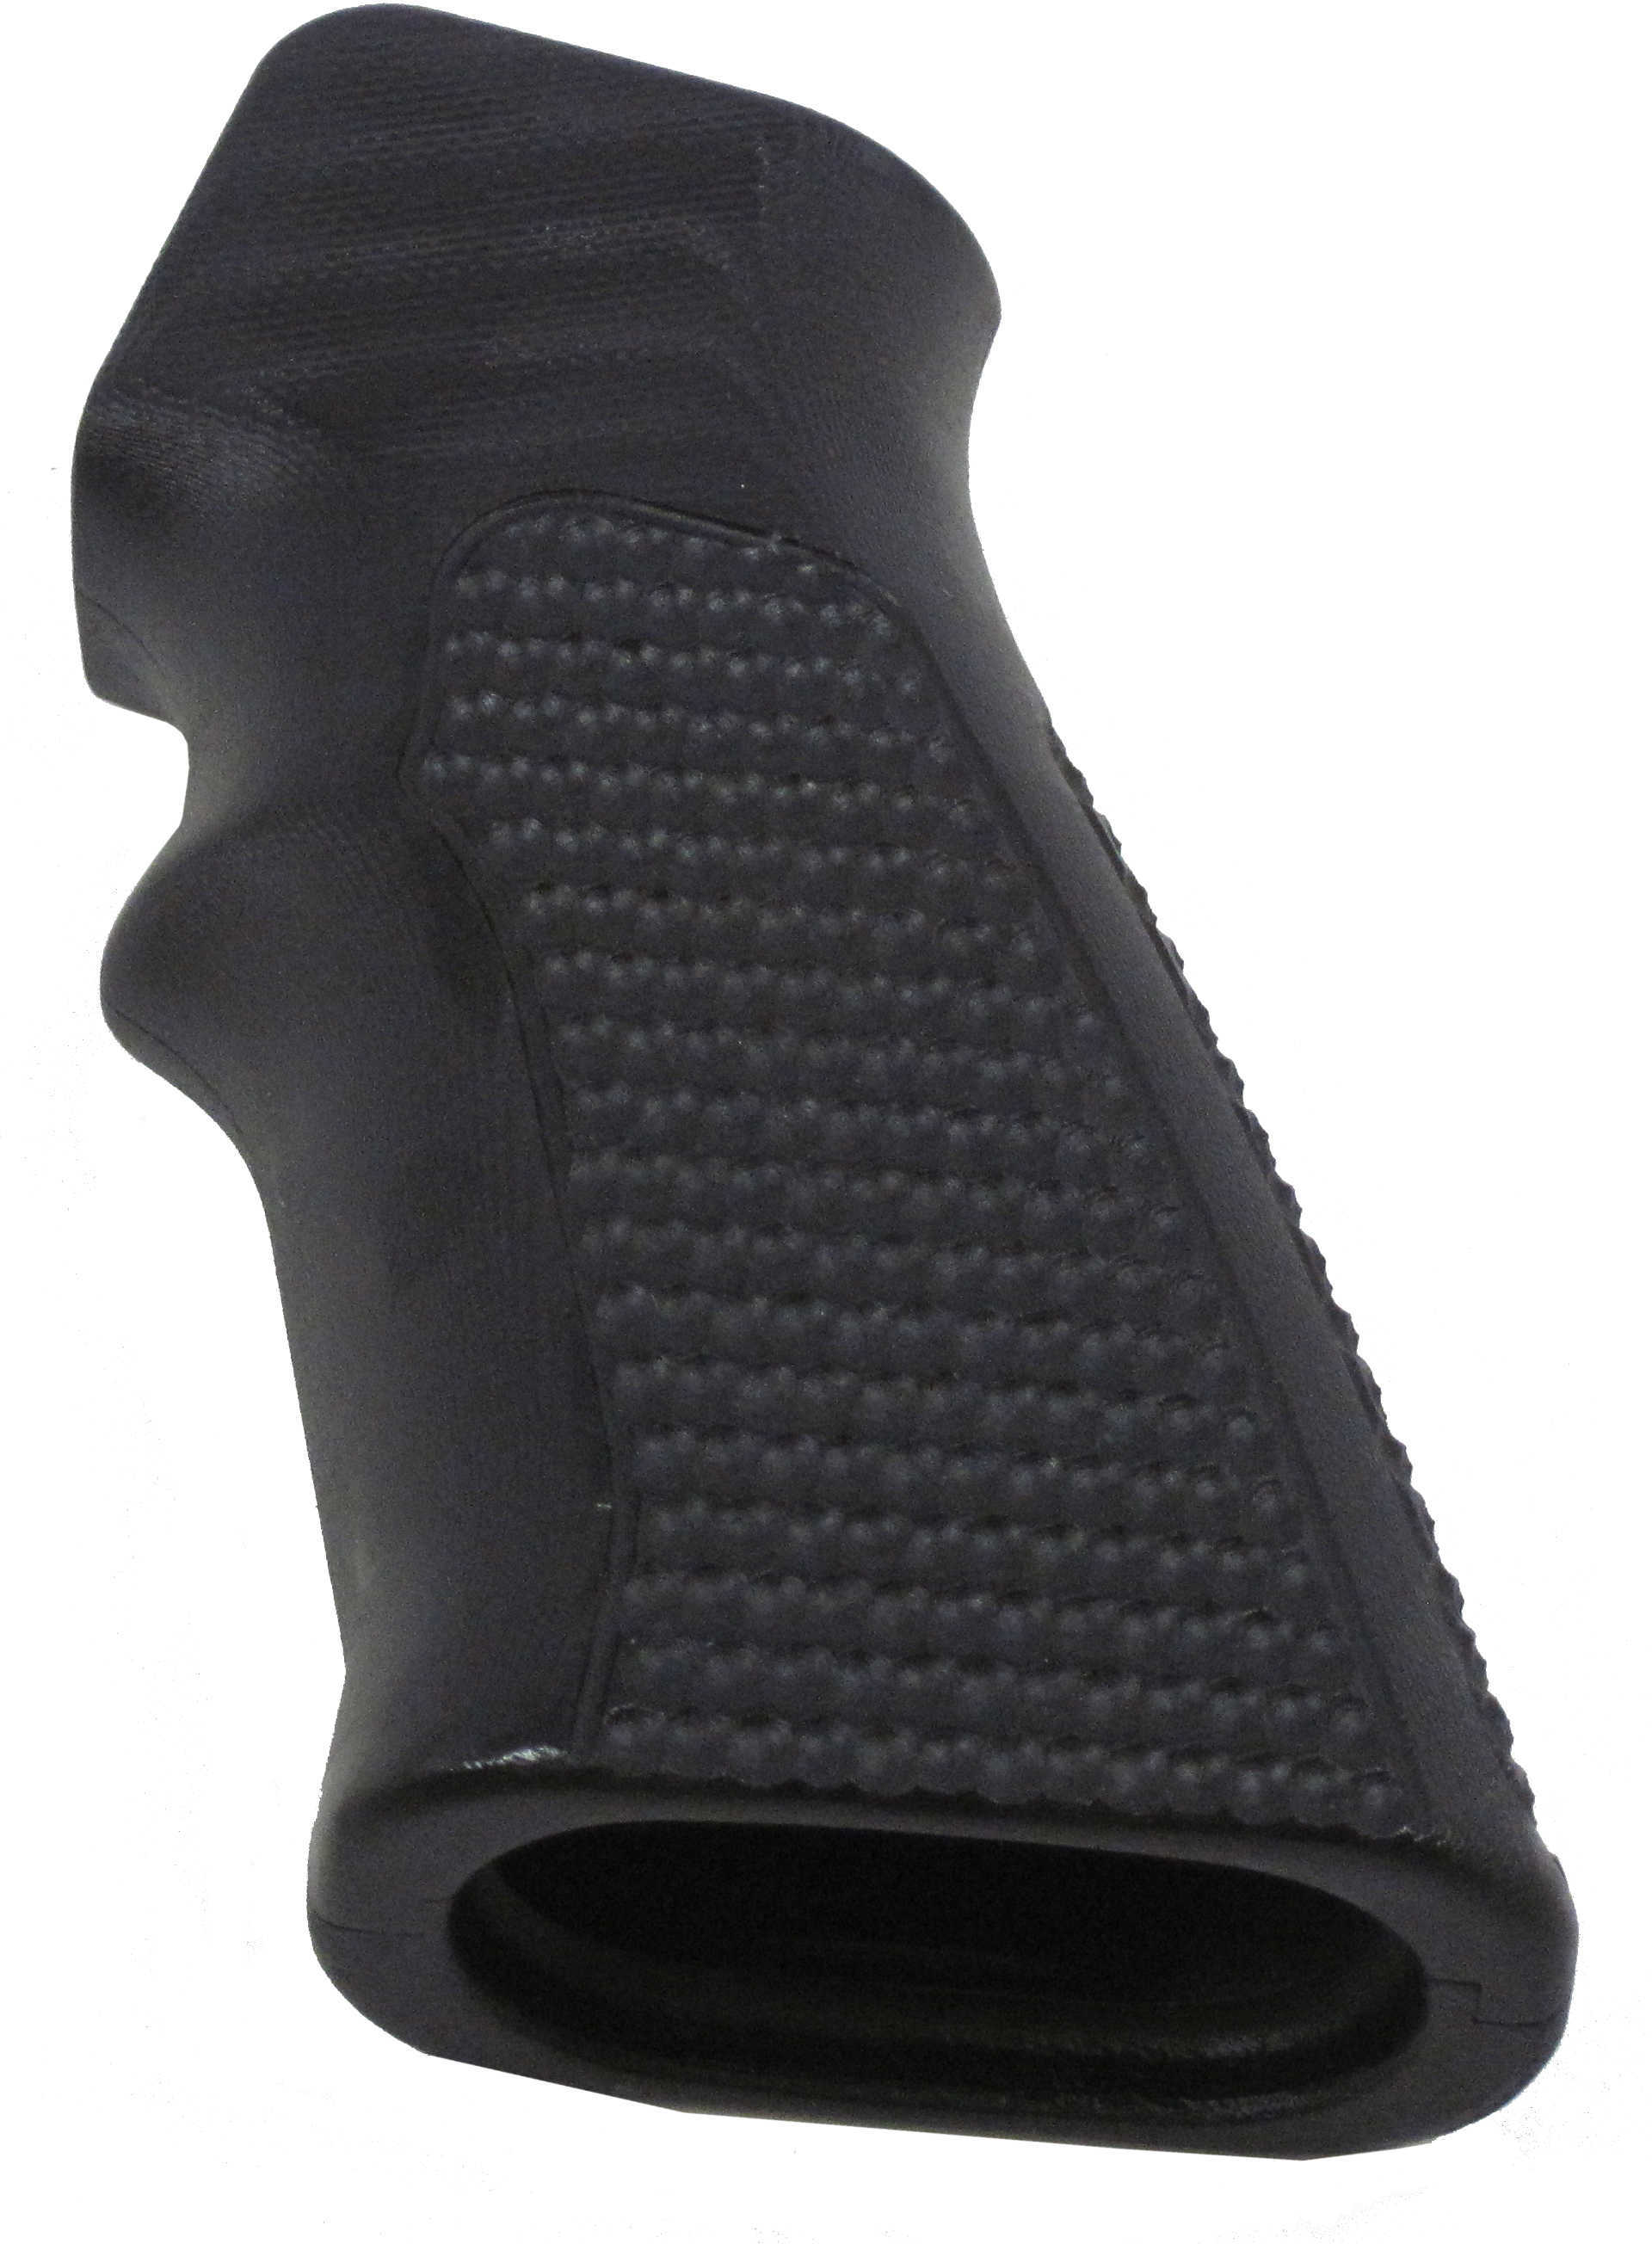 Hogue AR-15 Extreme Grips Pirahna G-10 Solid Black 15139